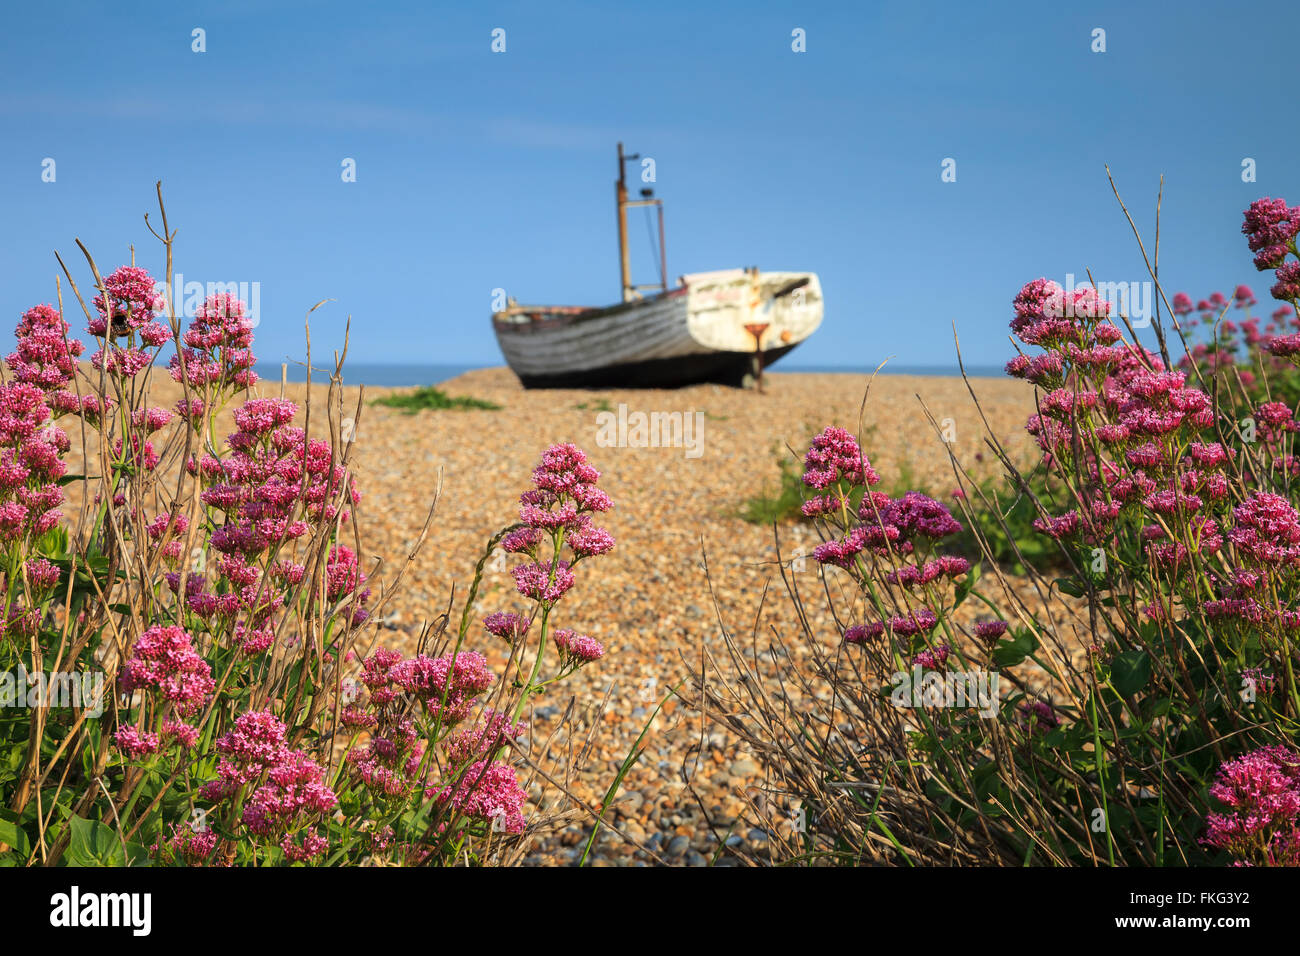 An old boat and flowers on the beach at Aldeburgh, Suffolk Stock Photo